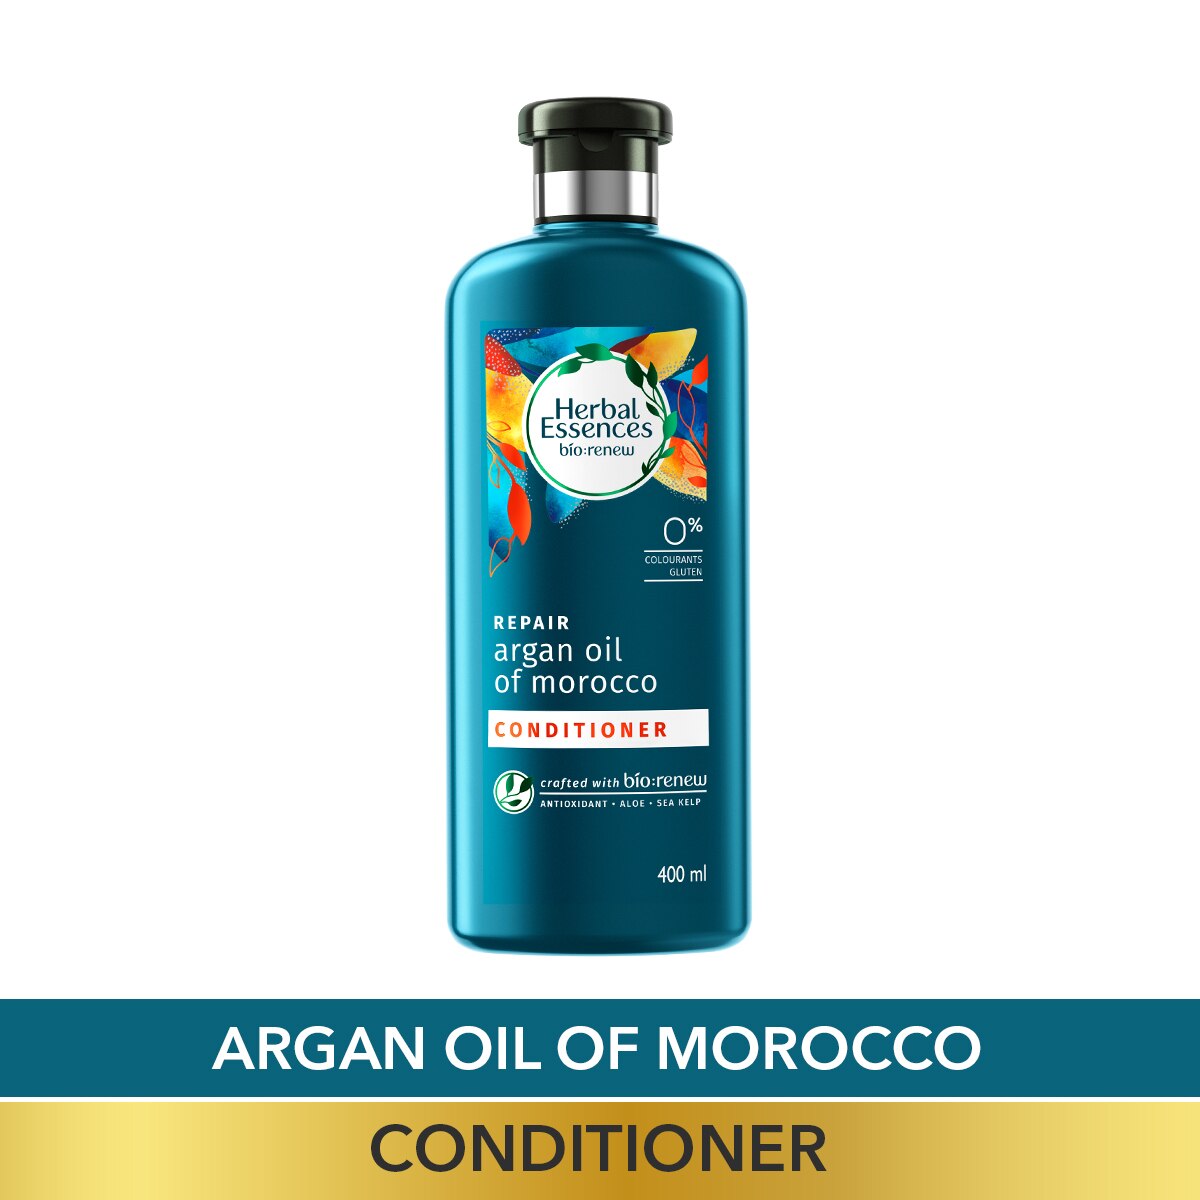 Herbal Essences Argan Oil of Morocco CONDITIONER, For Hair Repair and No Frizz- No Paraben, No Colorants, 400 ML